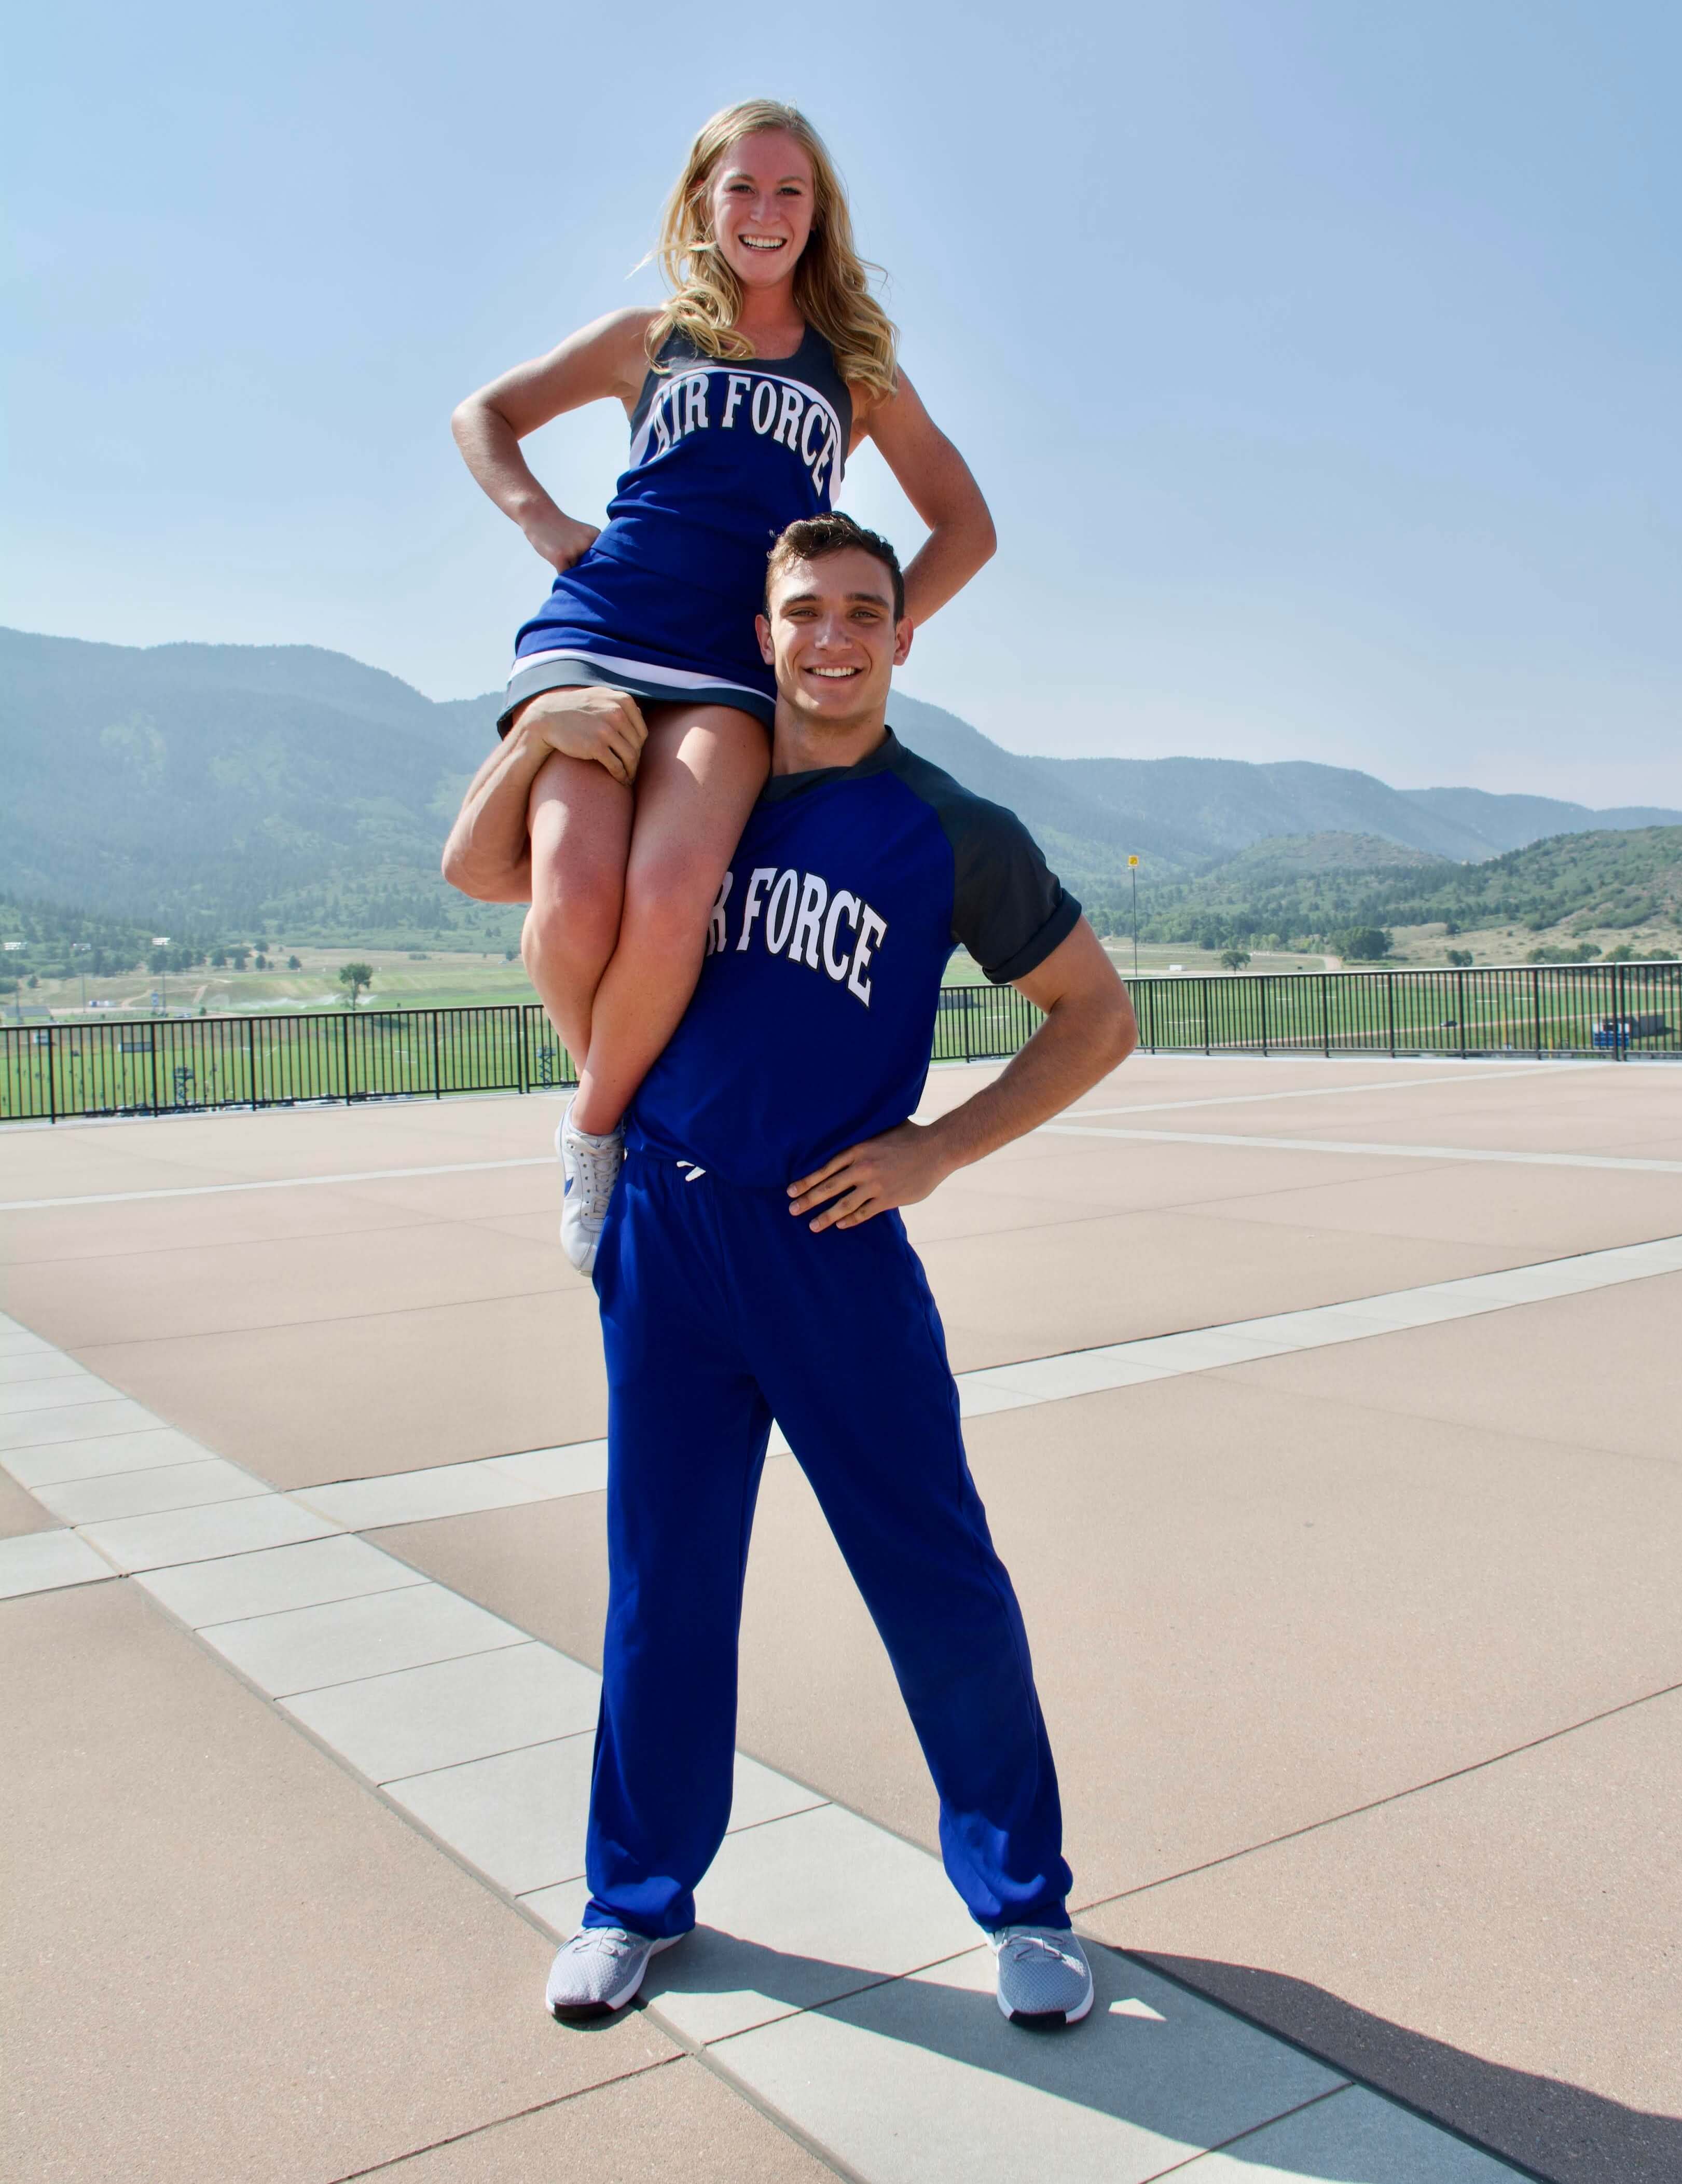 Thomas Chandler with a cheerleader on his shoulder